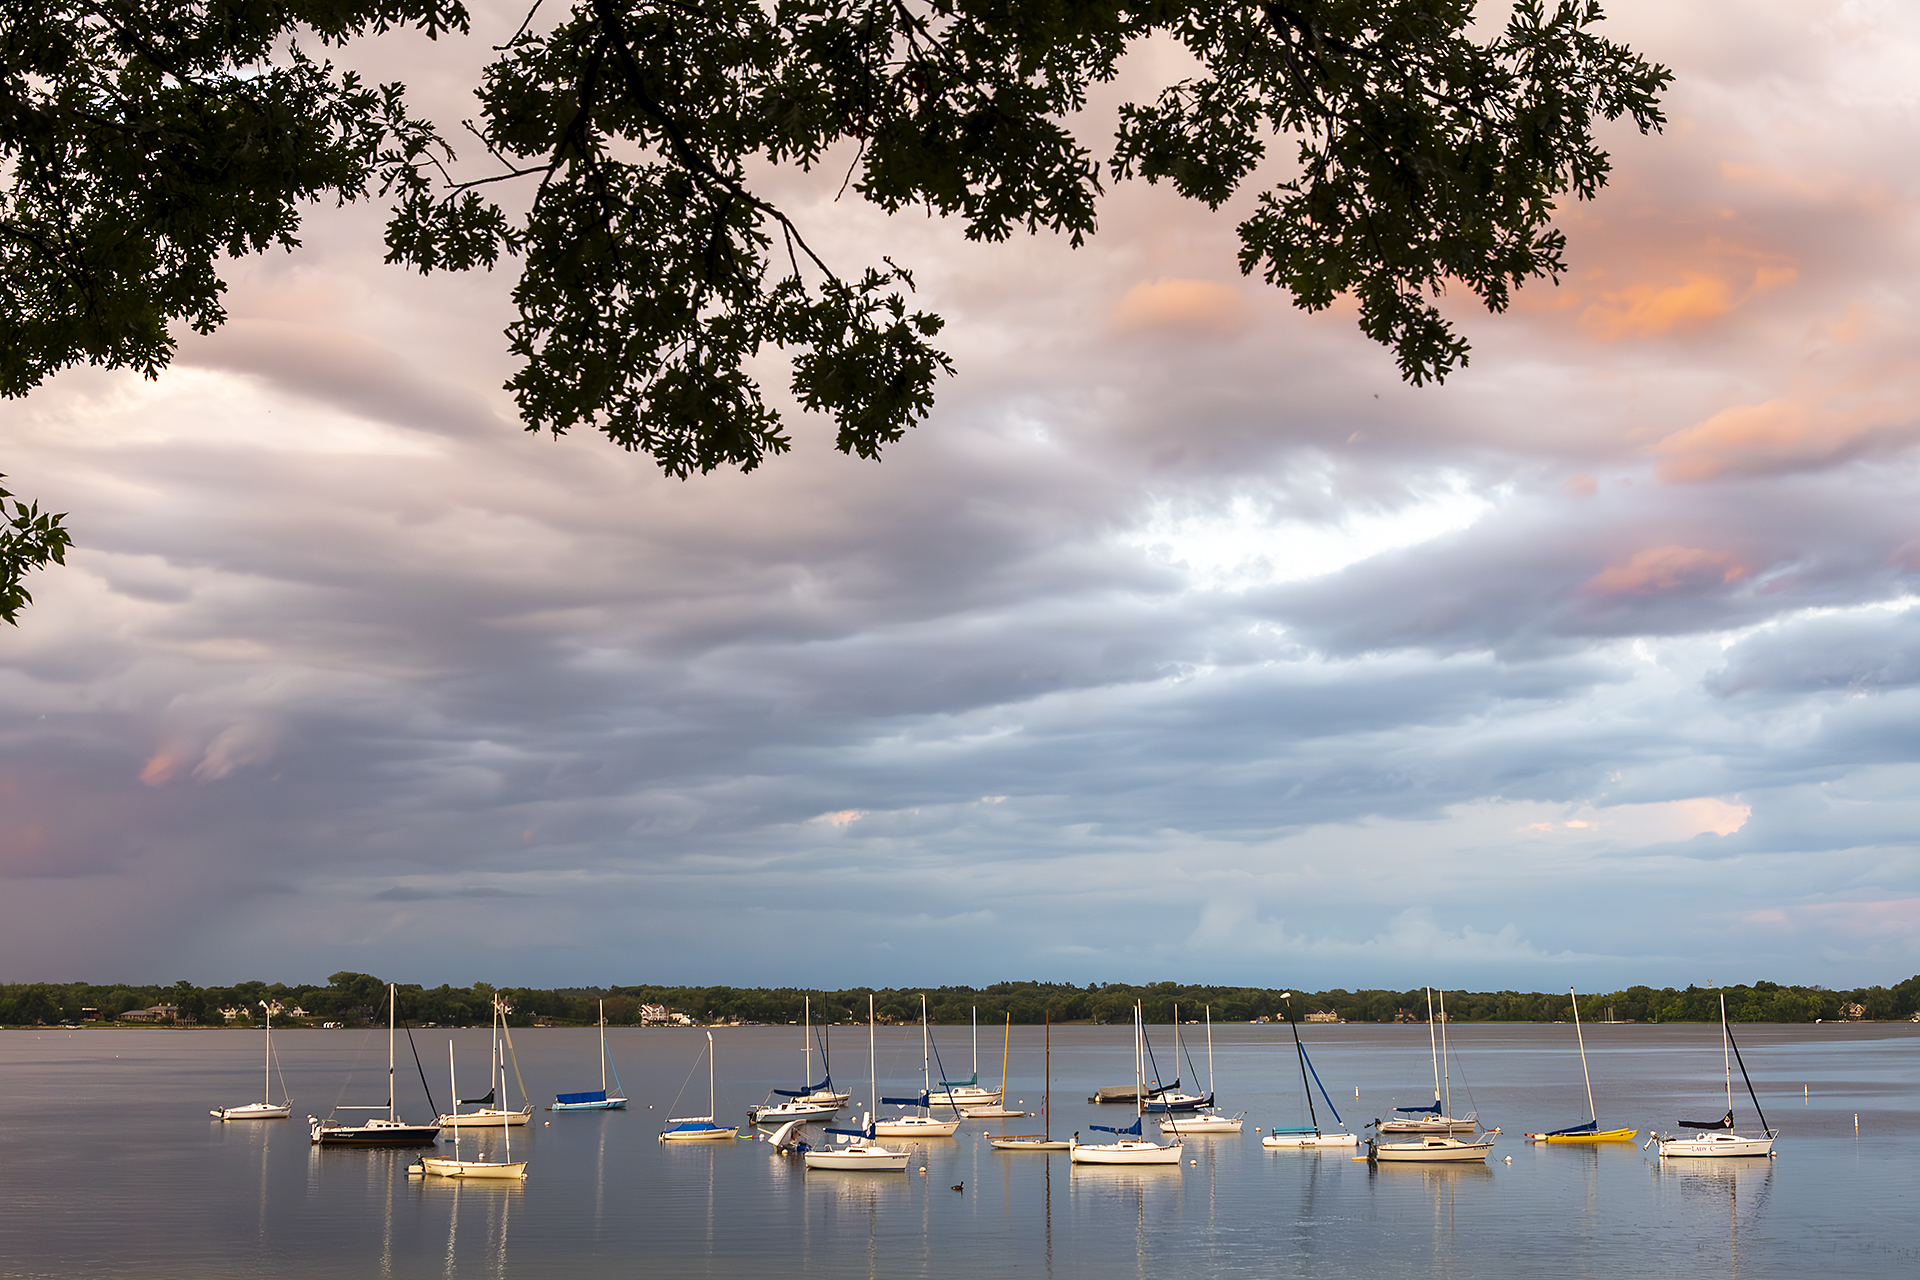 Sailboats after Storm by Rachel Cain